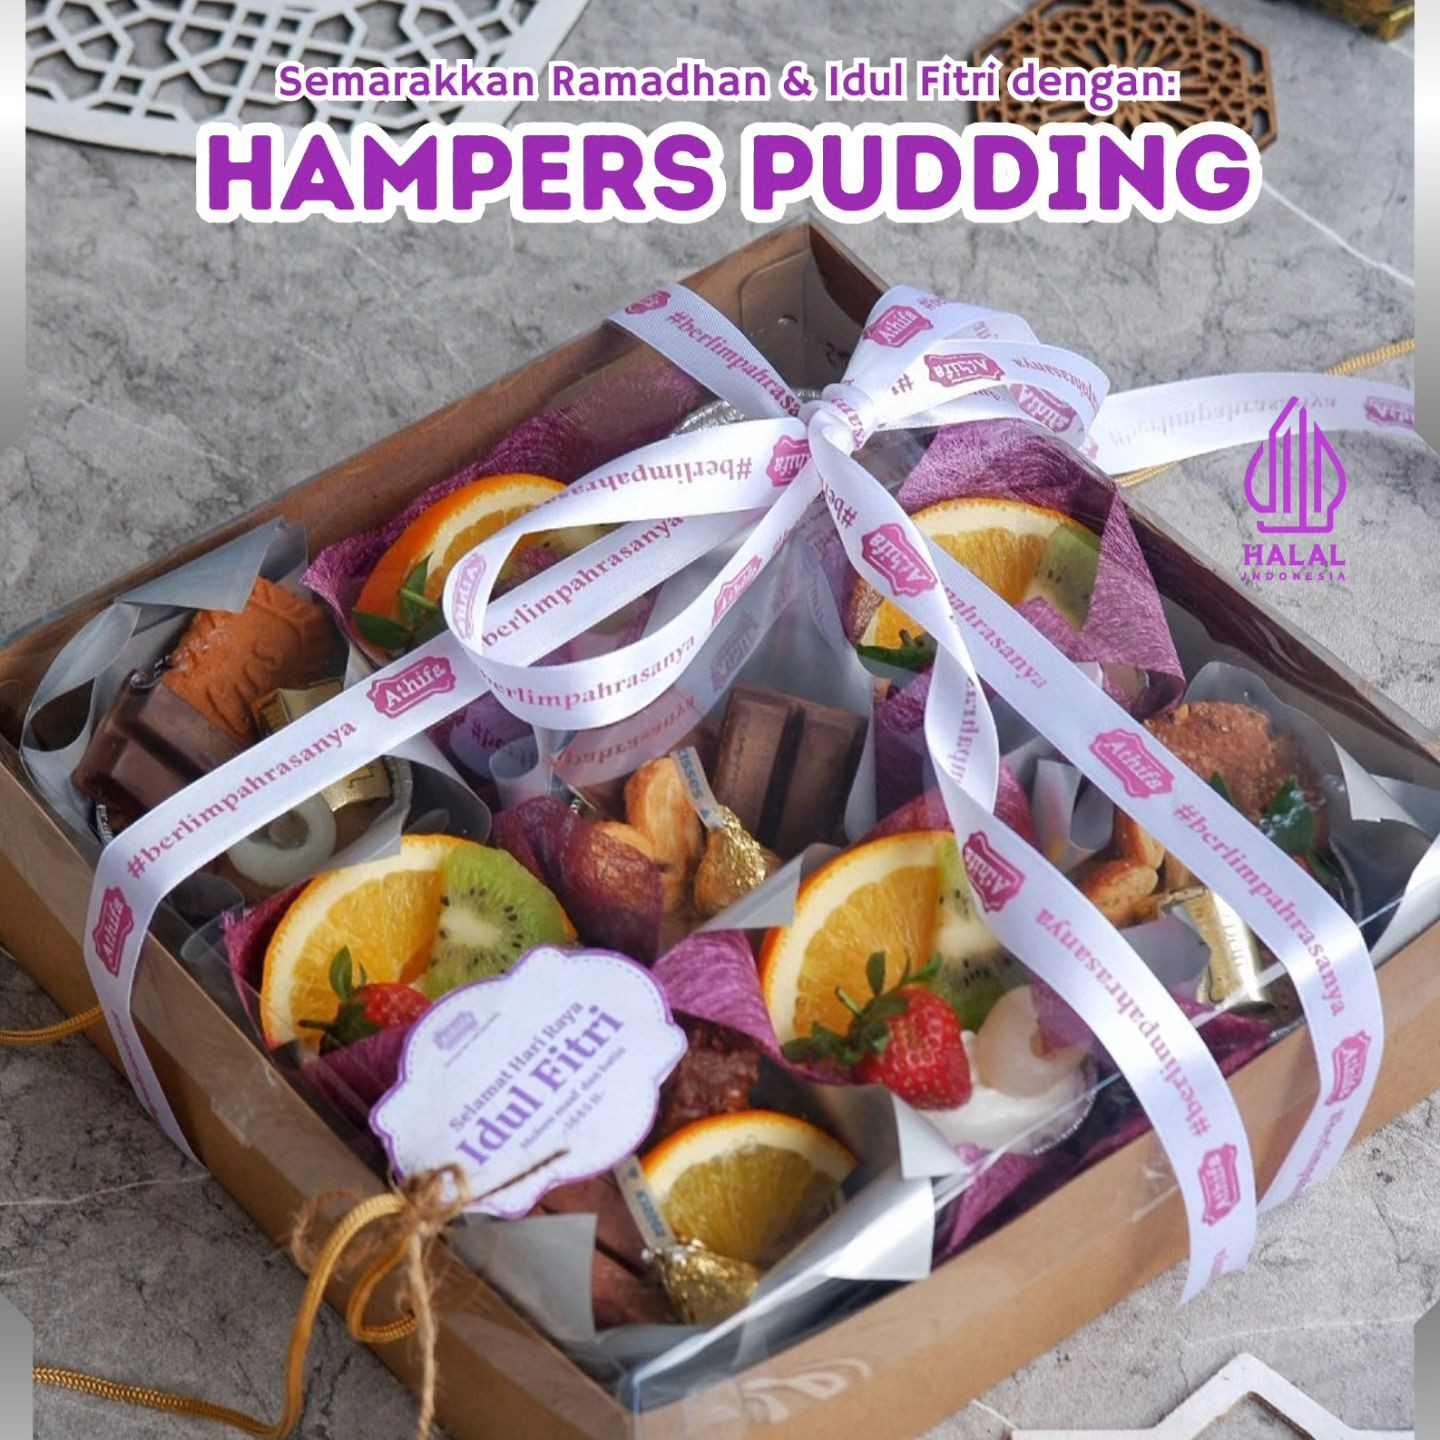 Hampers Pudding